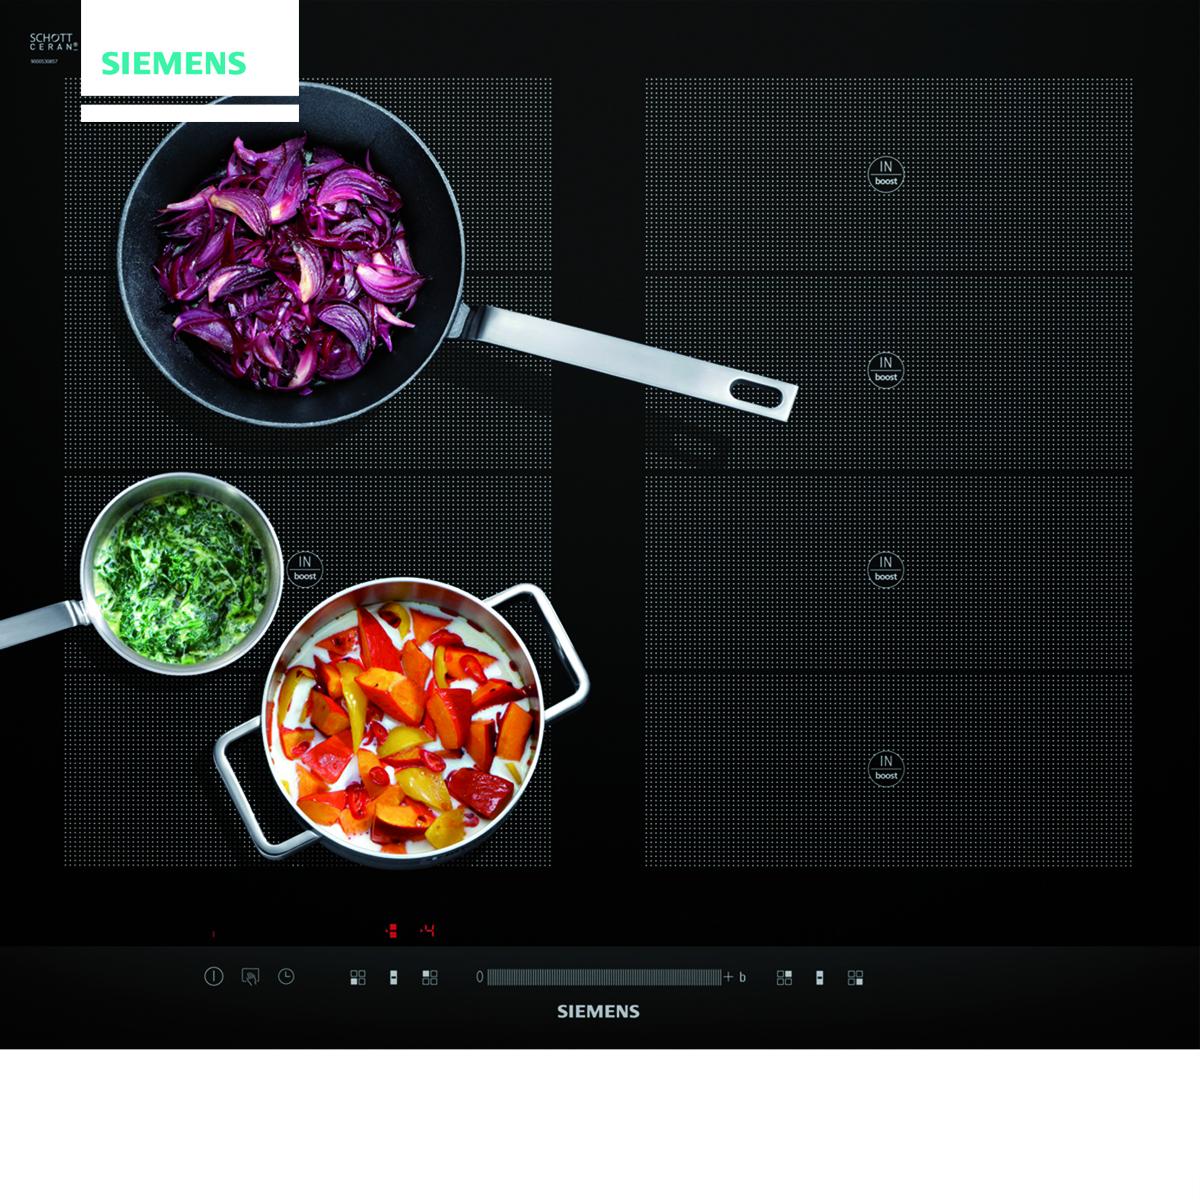 Enjoy a new cooking experience with Siemens
flexInduction hobs. We supply and install! #kitchens #colchester #essex